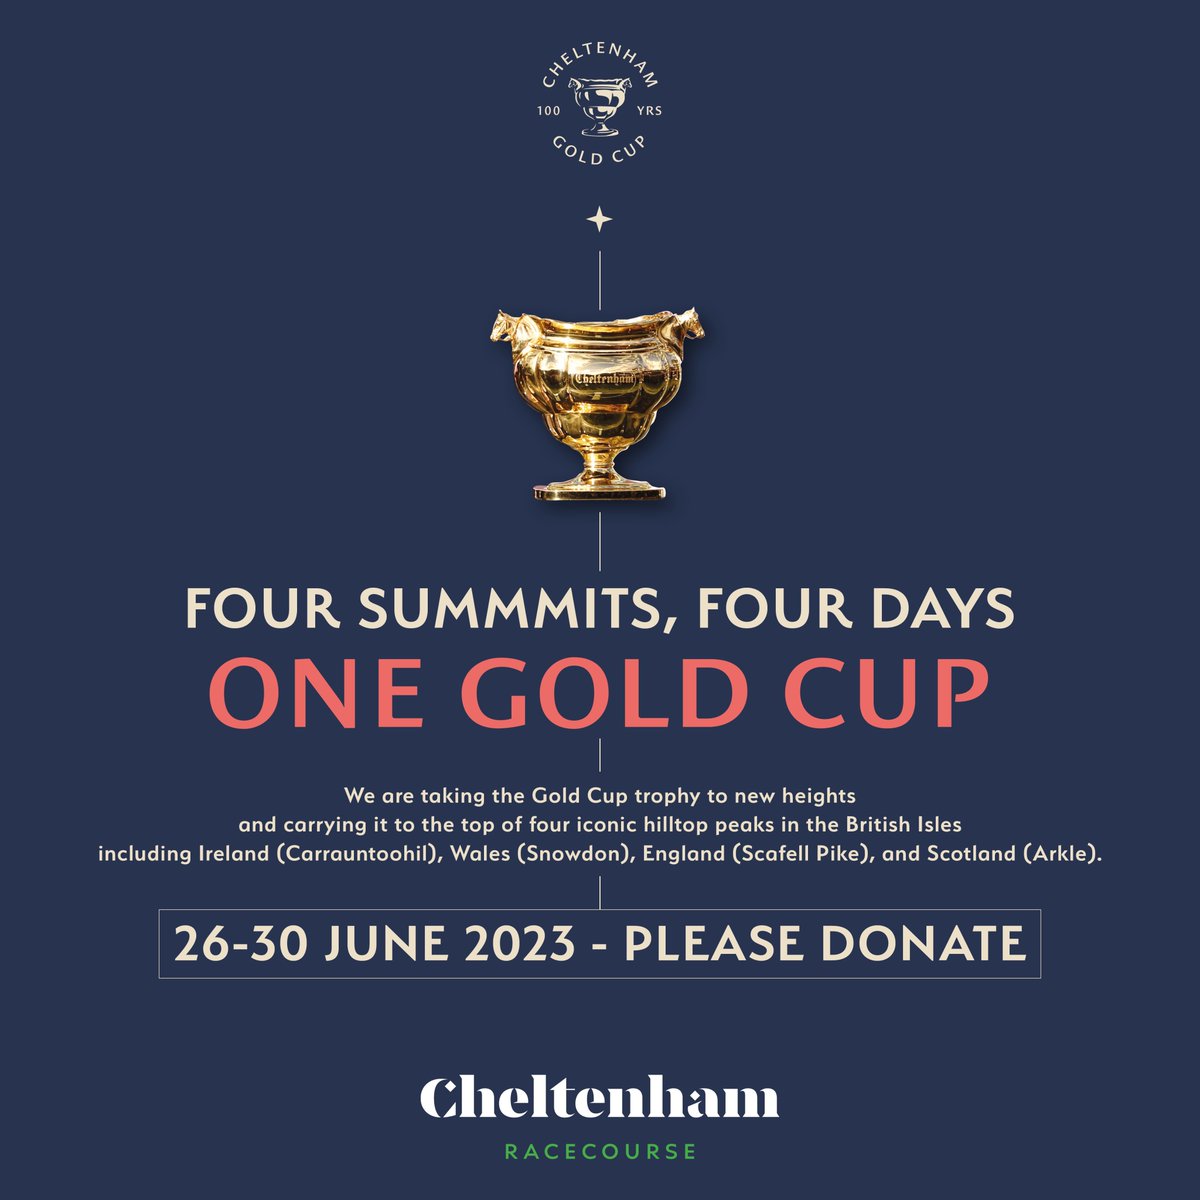 Four Days, Four Summits, One Gold Cup 🏆

To celebrate 100 years of the Cheltenham Gold Cup, the trophy will be taking on a special challenge next month in aid of @Racingwelfare...

Find out more and support the challenge here 👇
bit.ly/3MxXka8